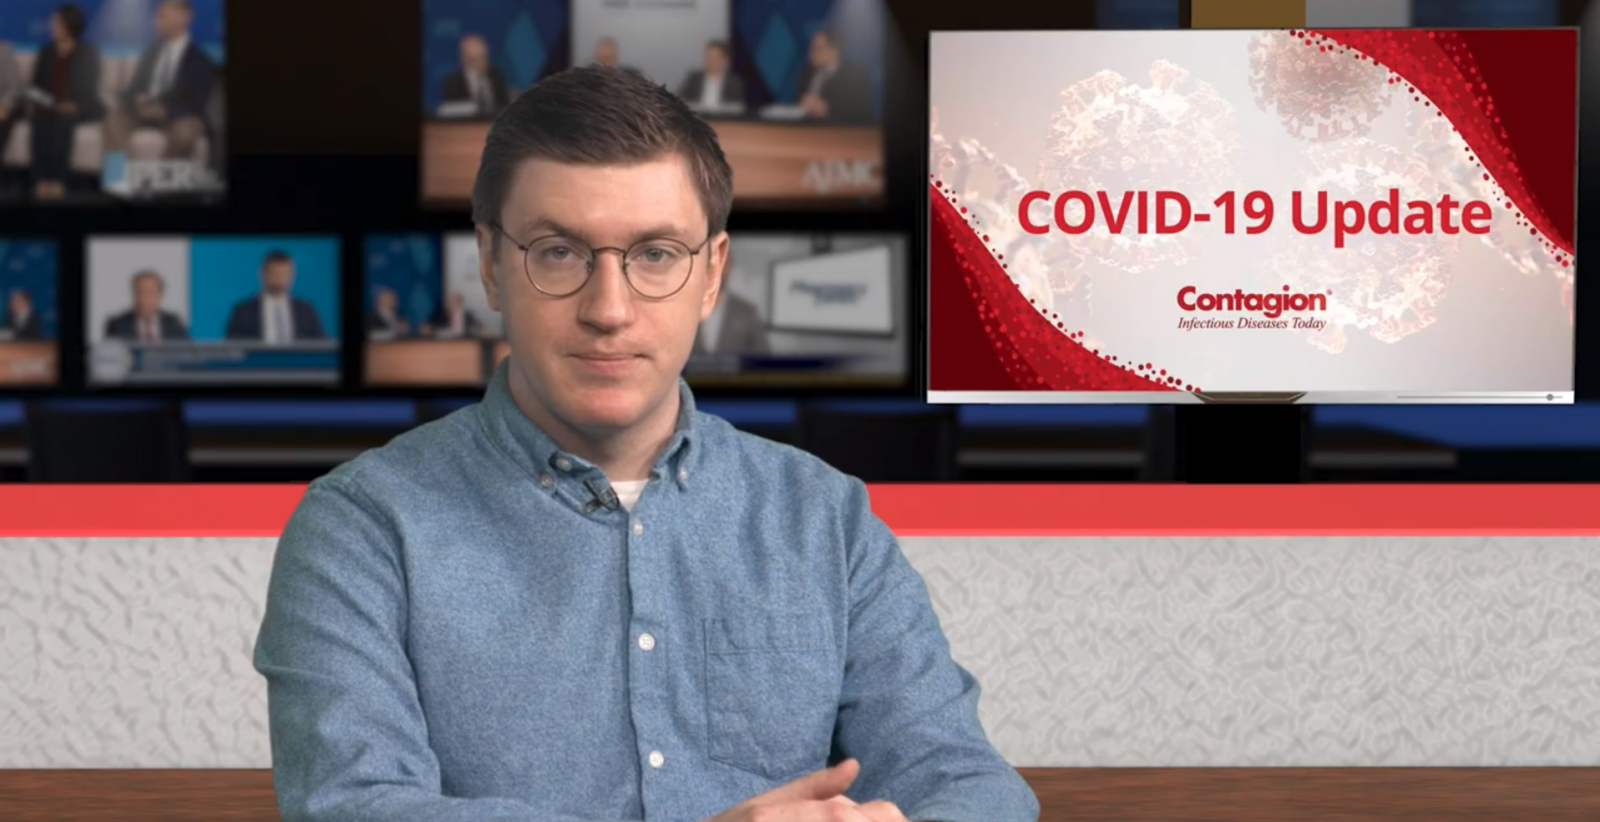 Contagion Live News Network: Coronavirus Updates for March 9, 2020